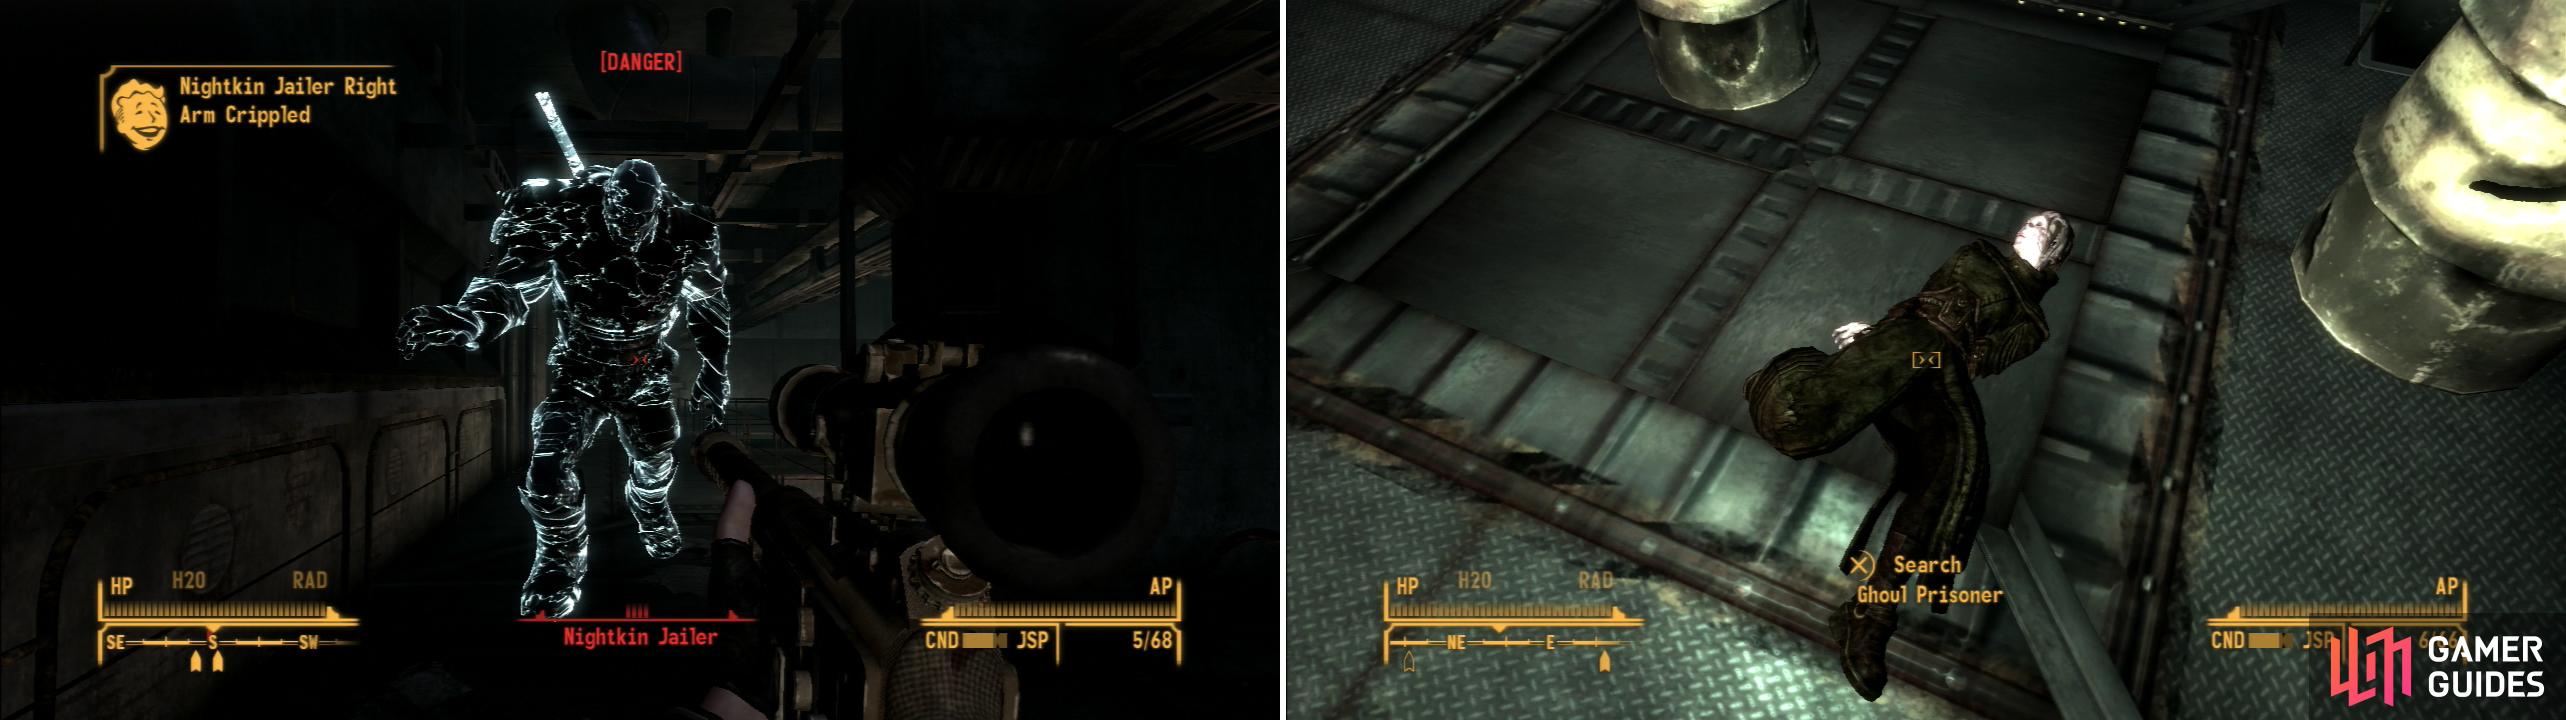 Kill the Nightking Jailer to get access to the cells below (left) where you can find Harland’s friend (right).